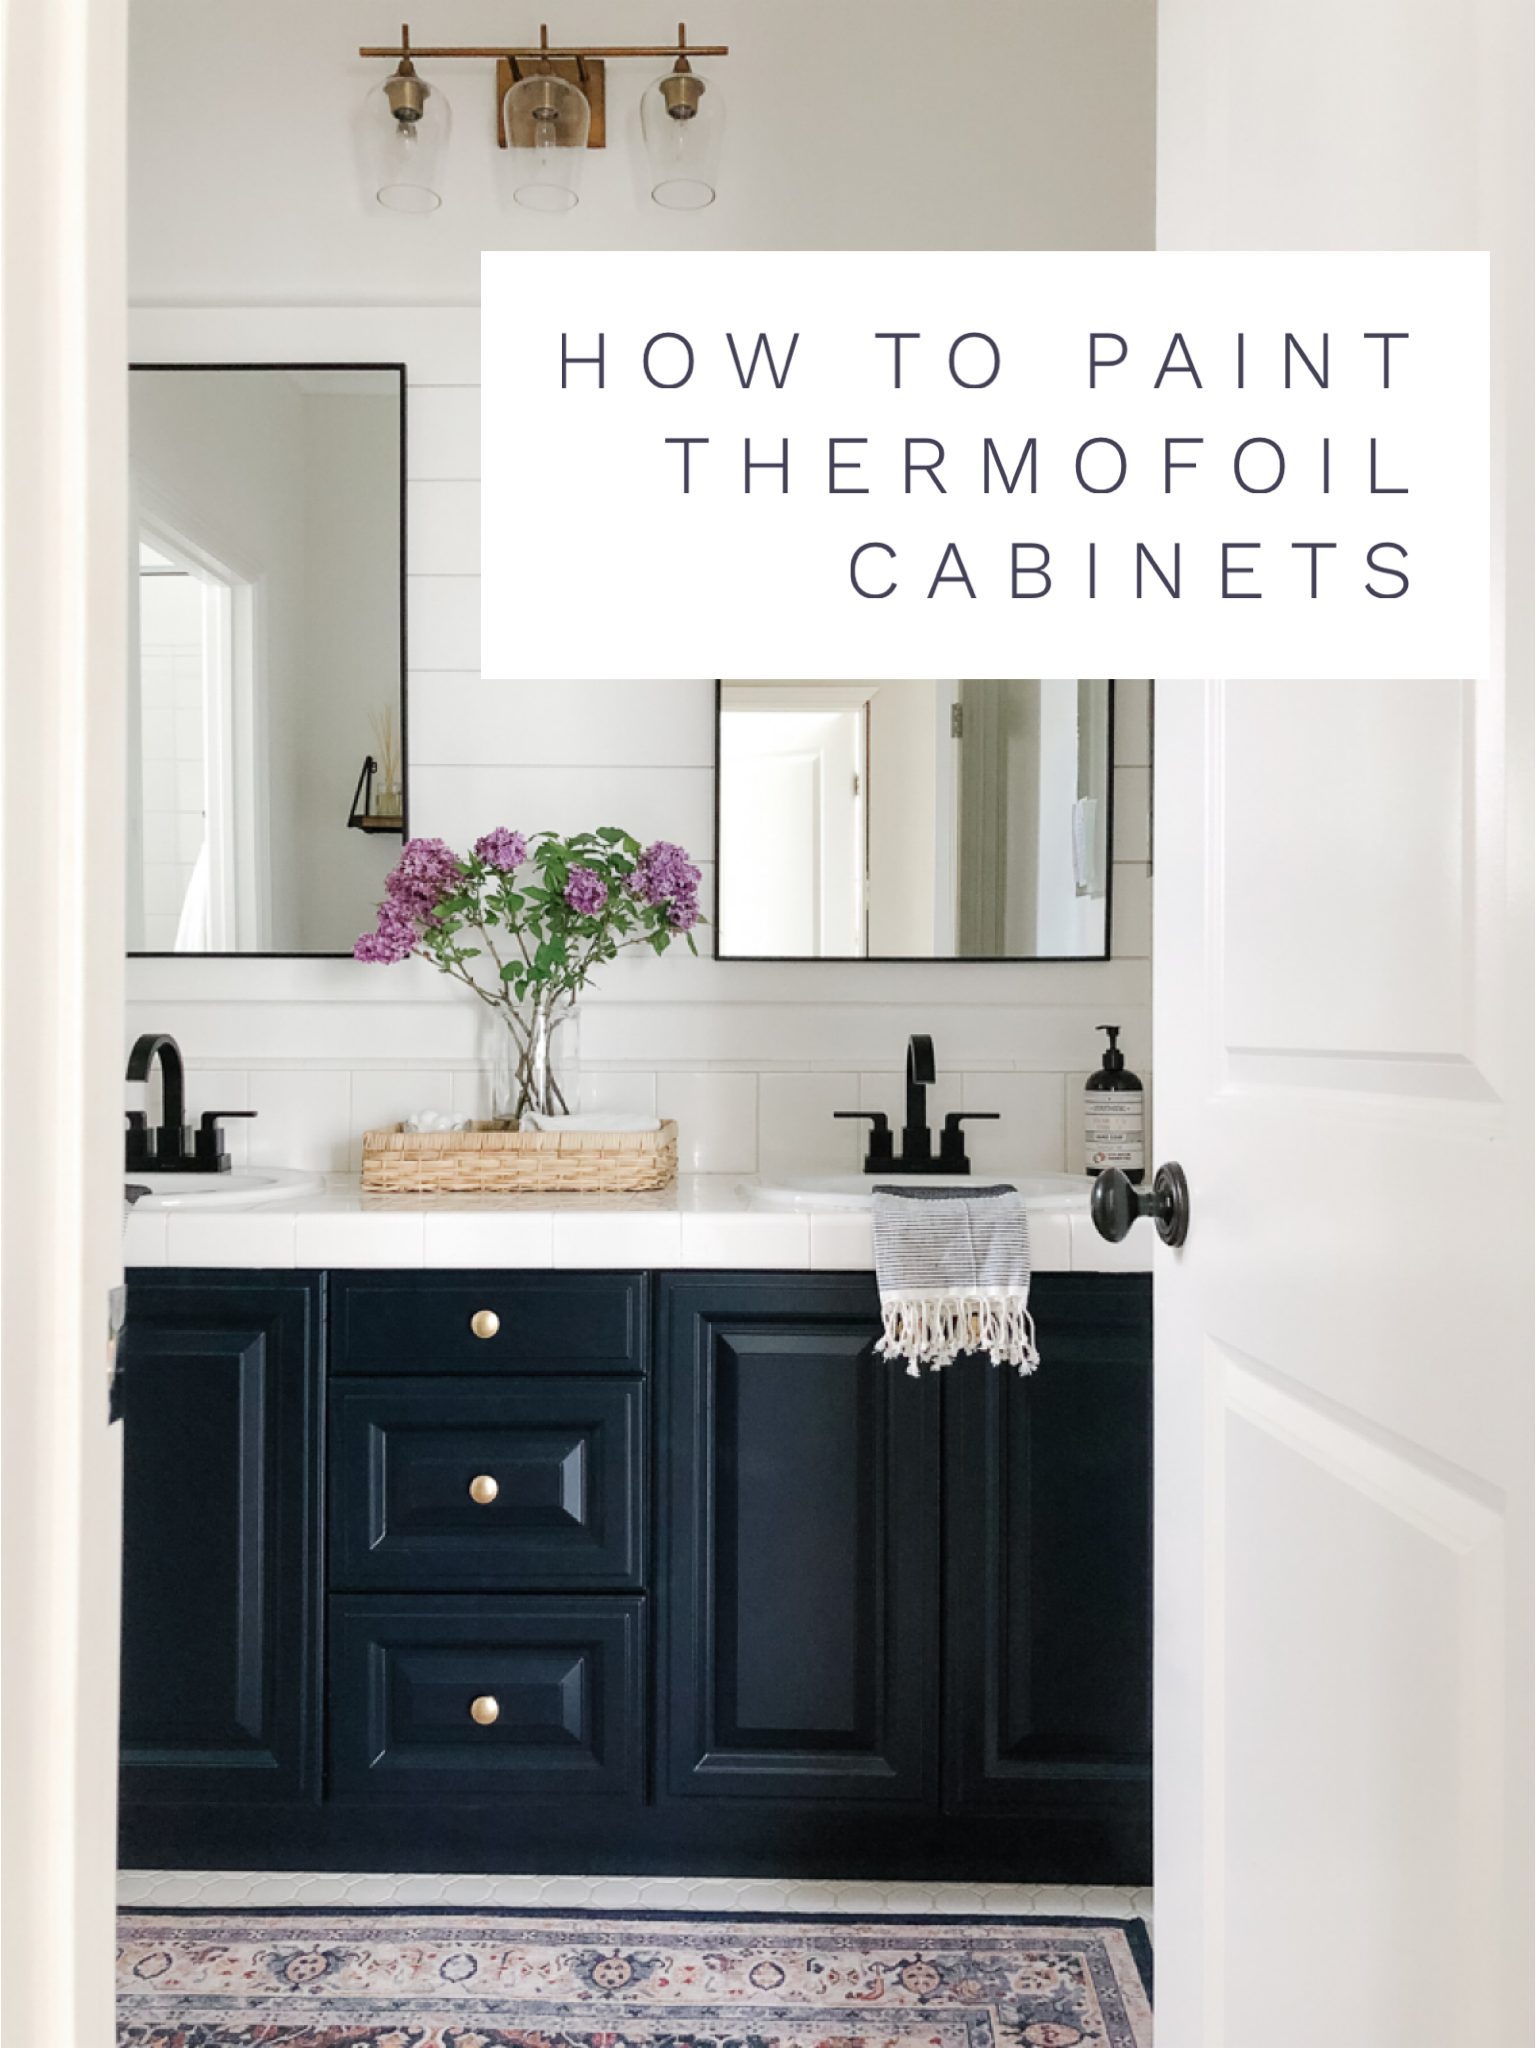 How To Paint Thermofoil Cabinets A Thoughtful Place,Modern Brown And Gray Bedroom